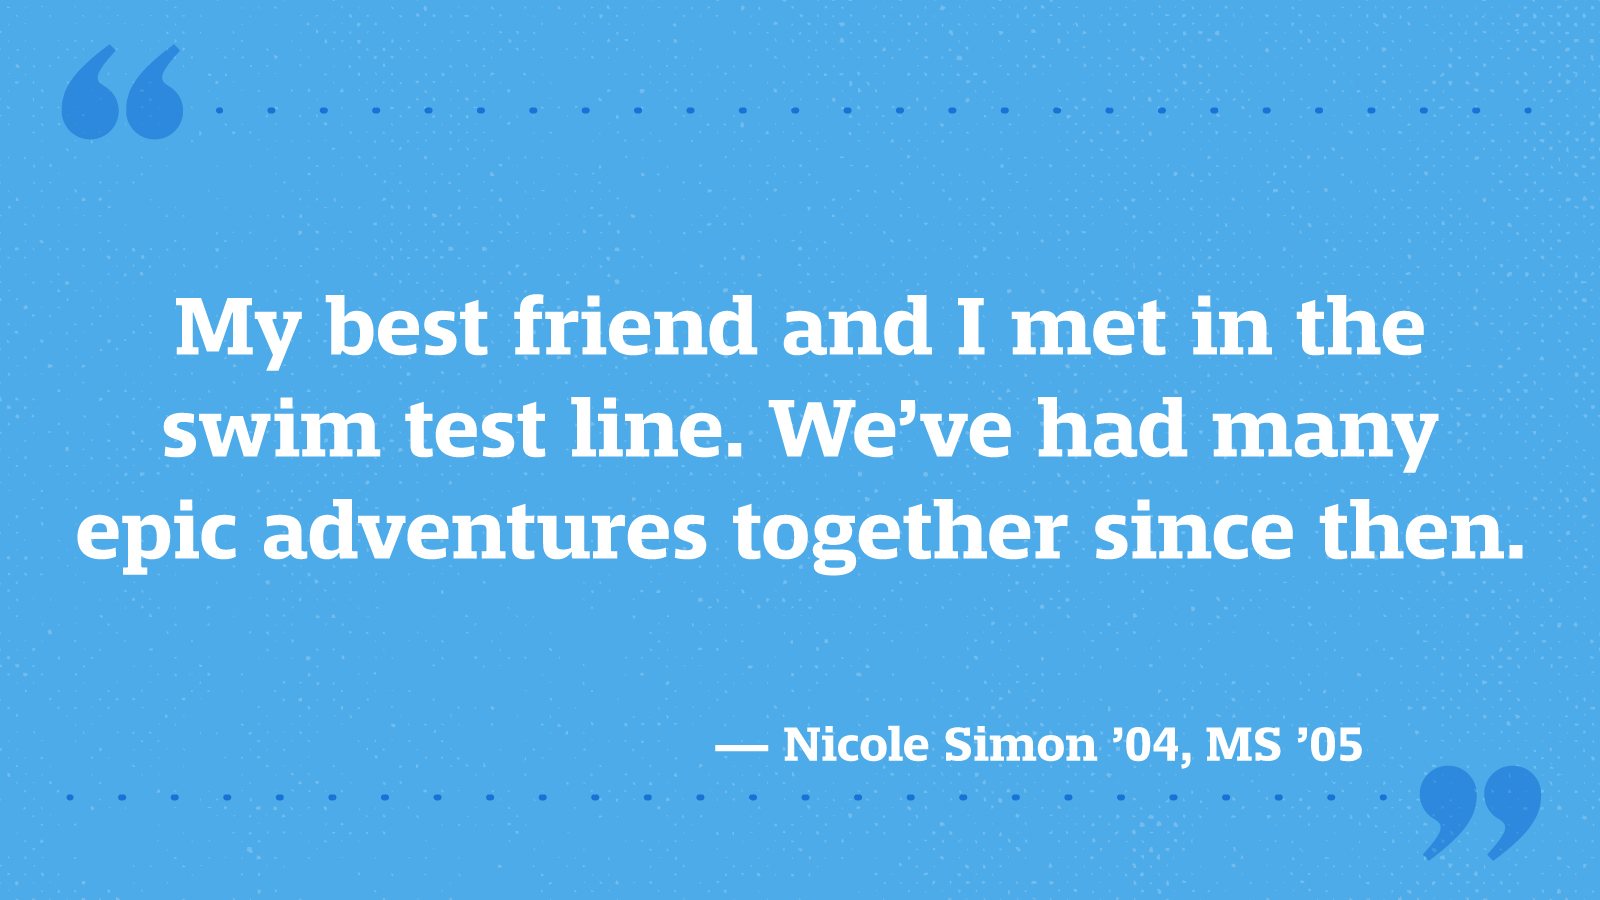 My best friend and I met in the swim test line. We’ve had many epic adventures together since then. — Nicole Simon ’04, MS ’05